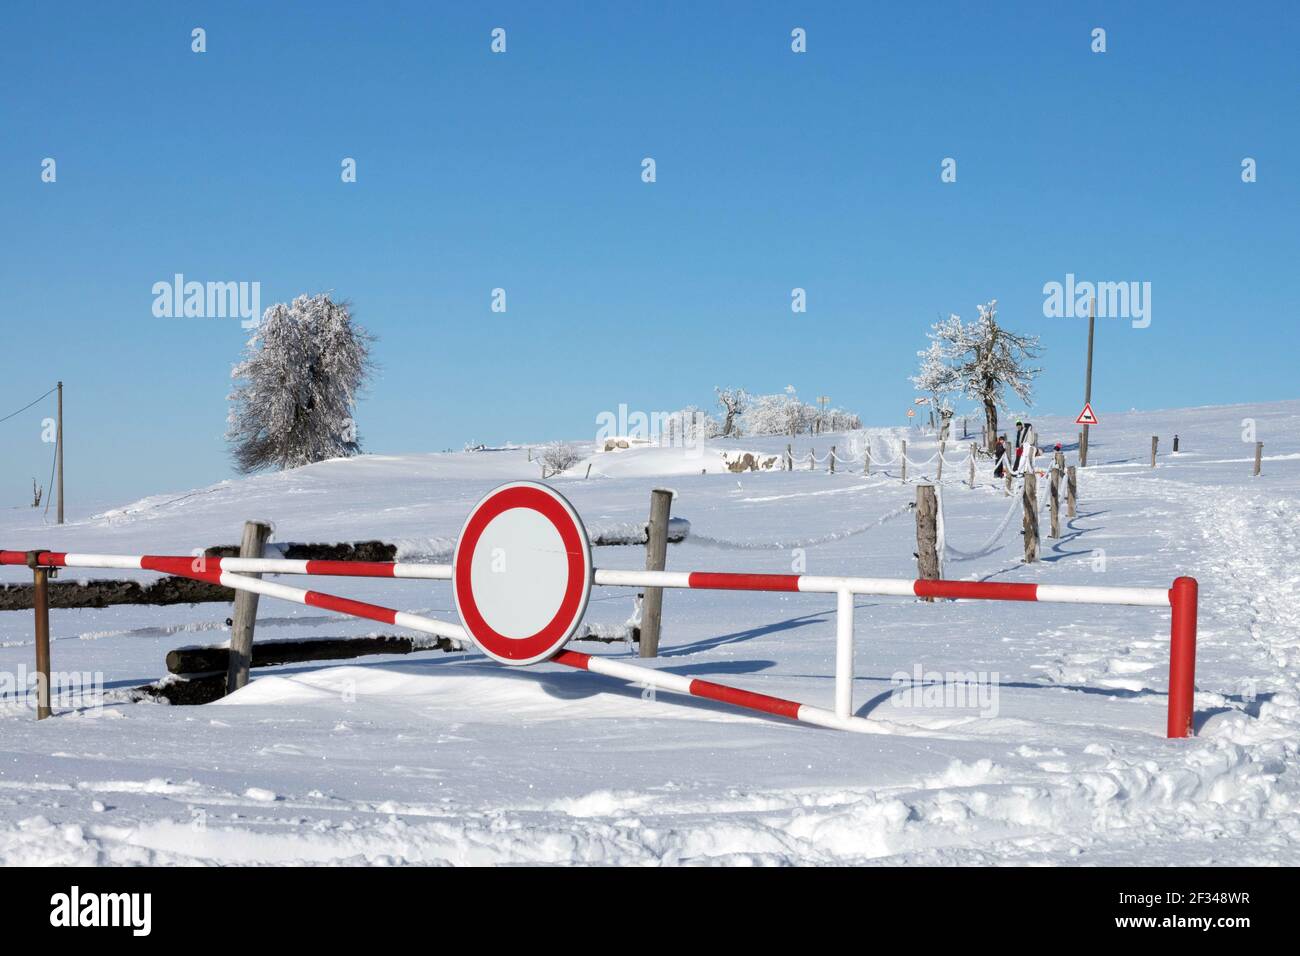 Snow covered road sign Czech Republic, Rural road scenery Stock Photo